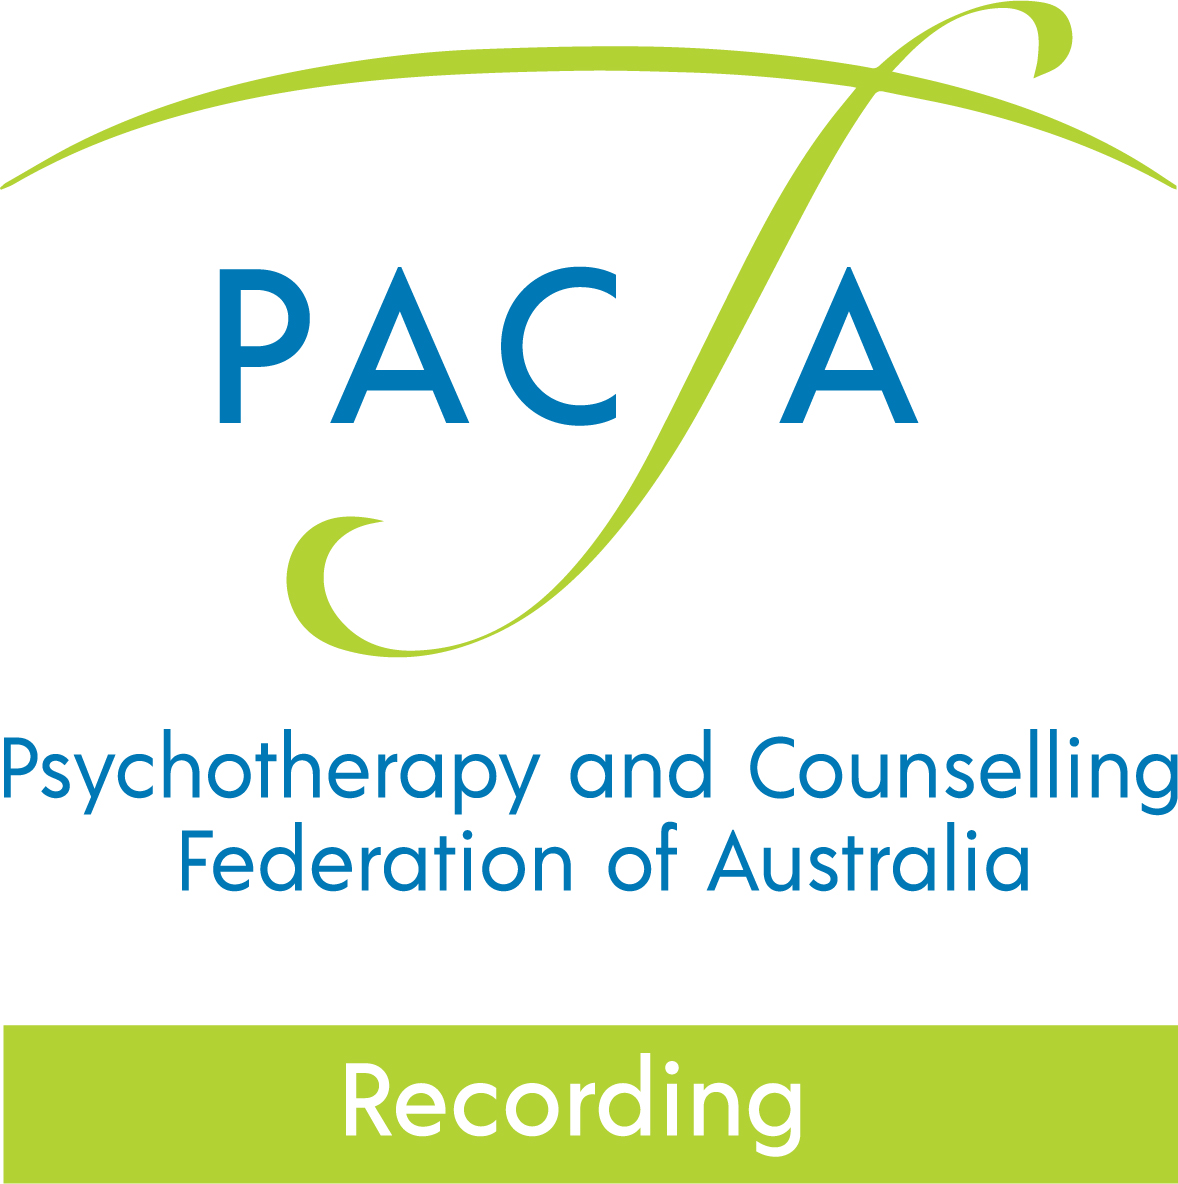 Practical counselling strategies for the everyday counsellor